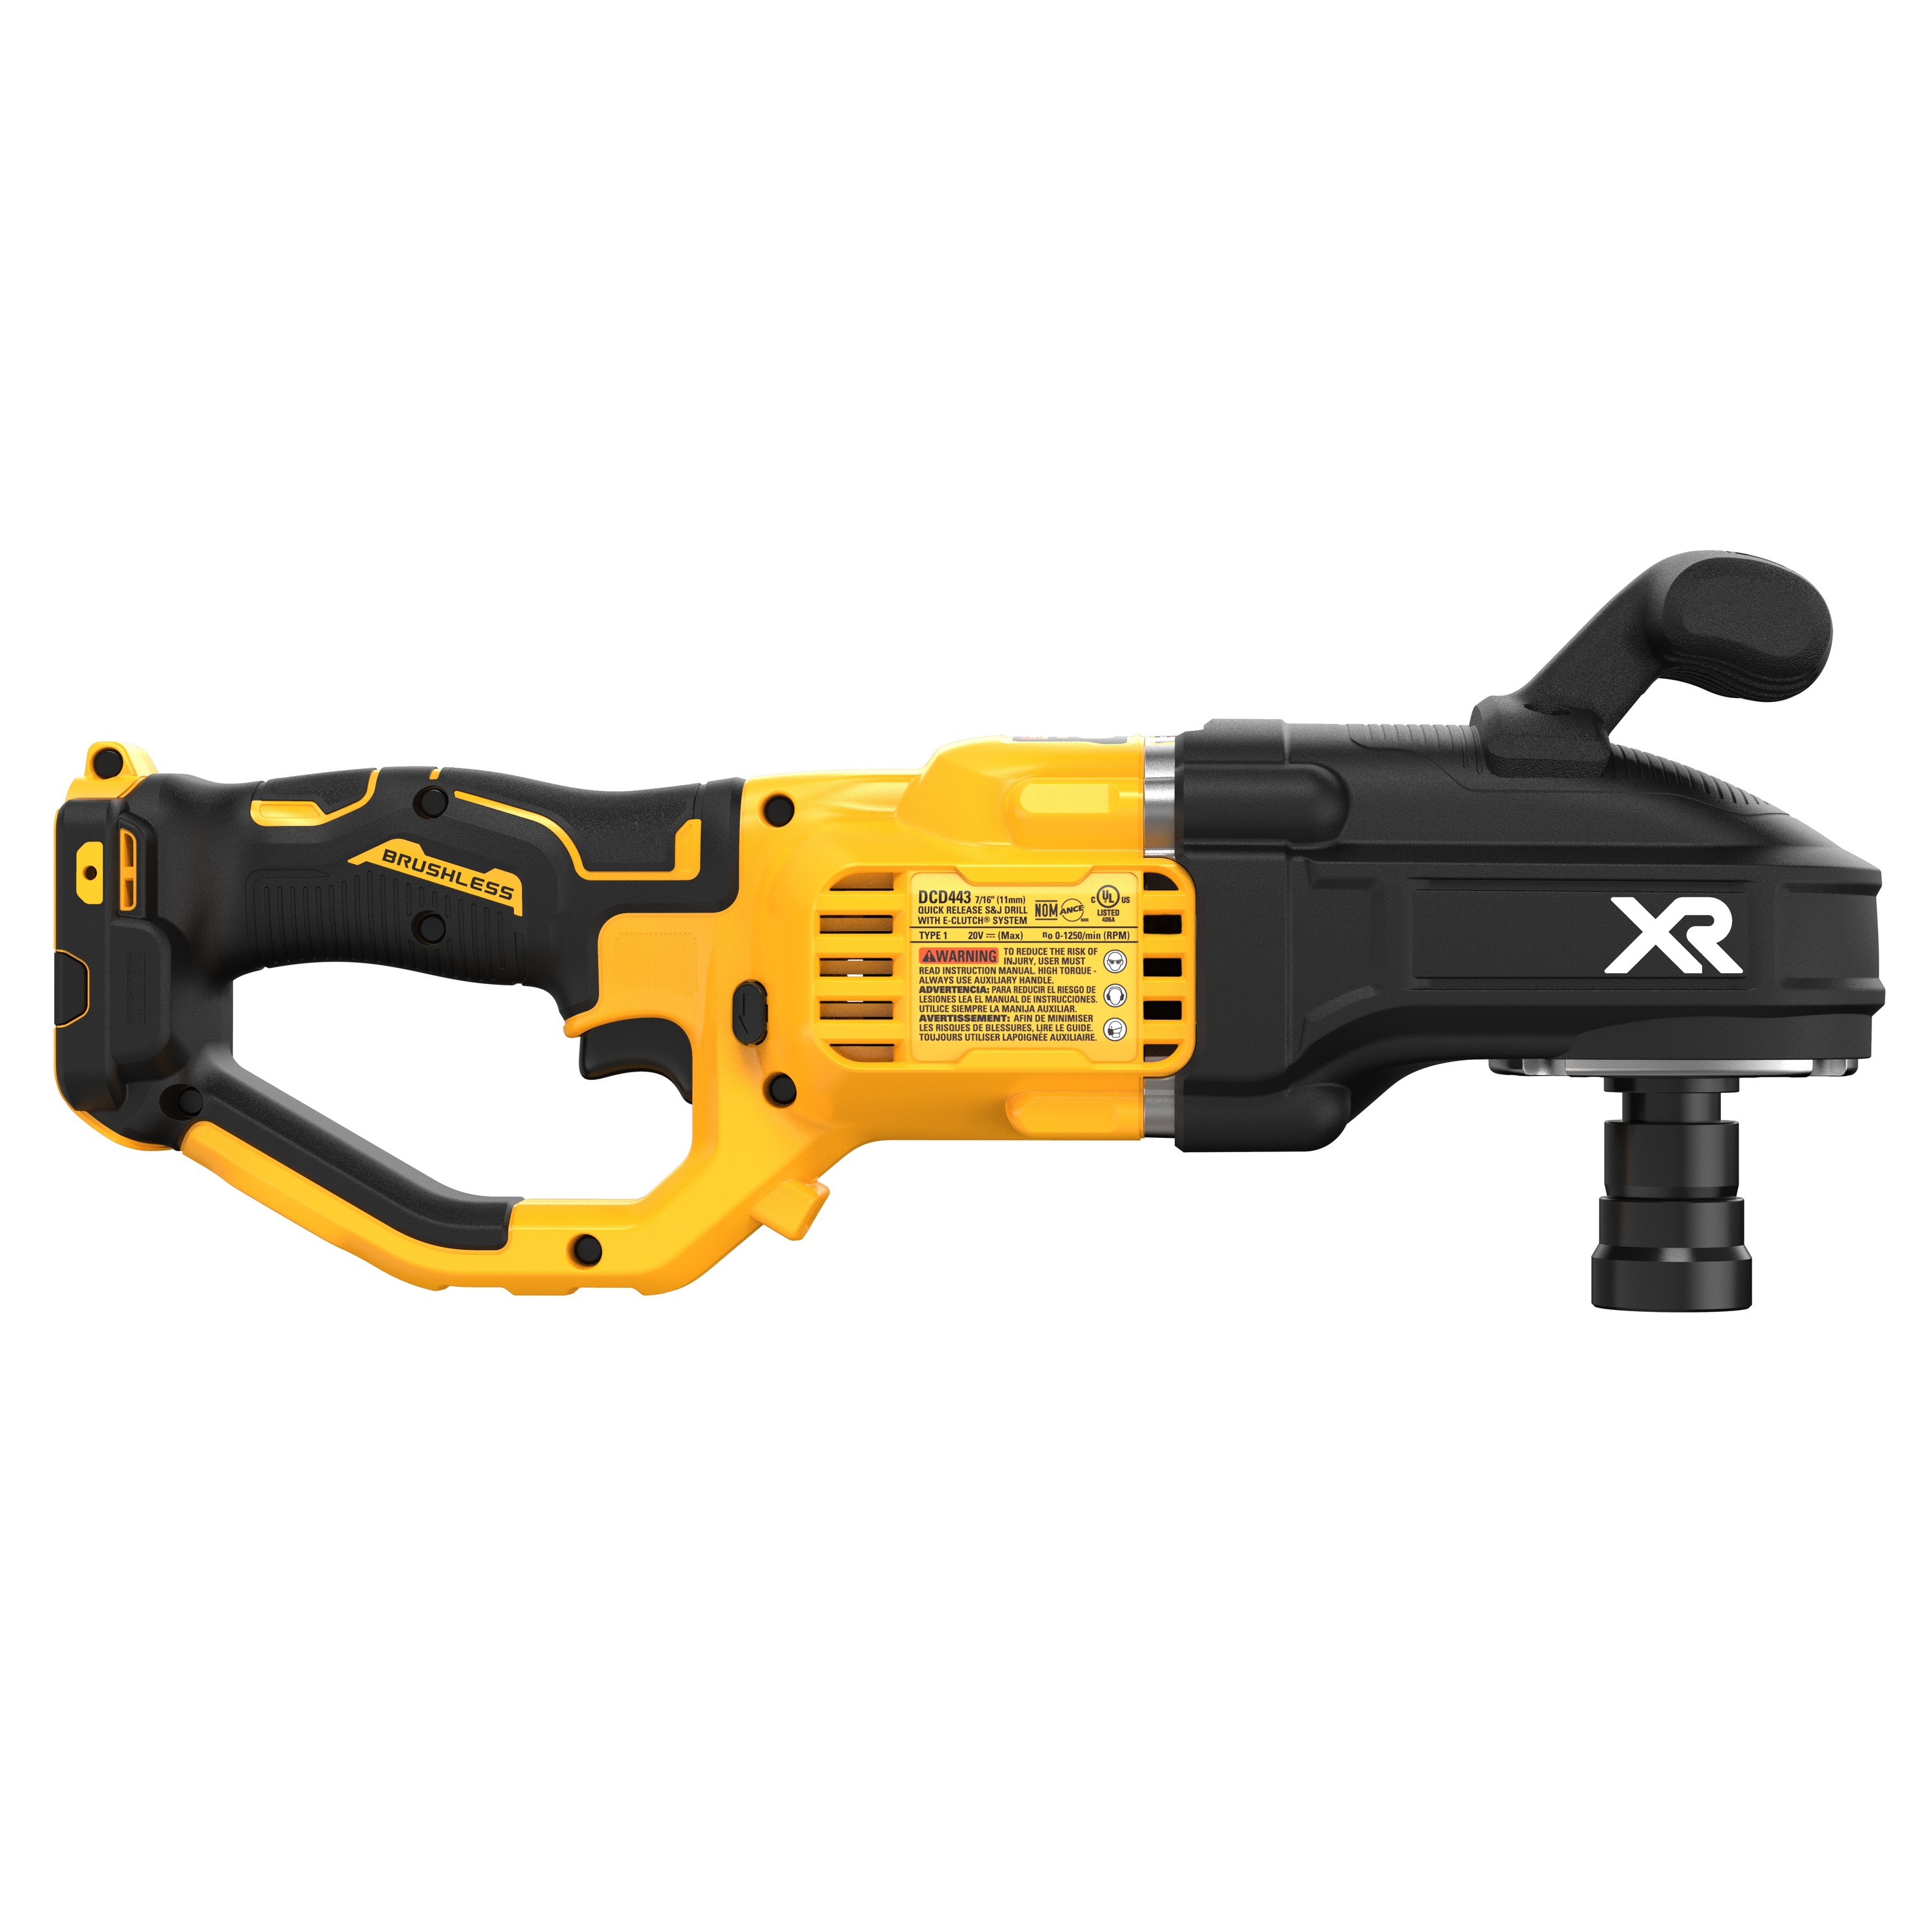 DEWALT - 20V MAX XR Brushless Cordless 716 in Compact Quick Change Stud and Joist Drill with POWER DETECT Tool Only - DCD443B